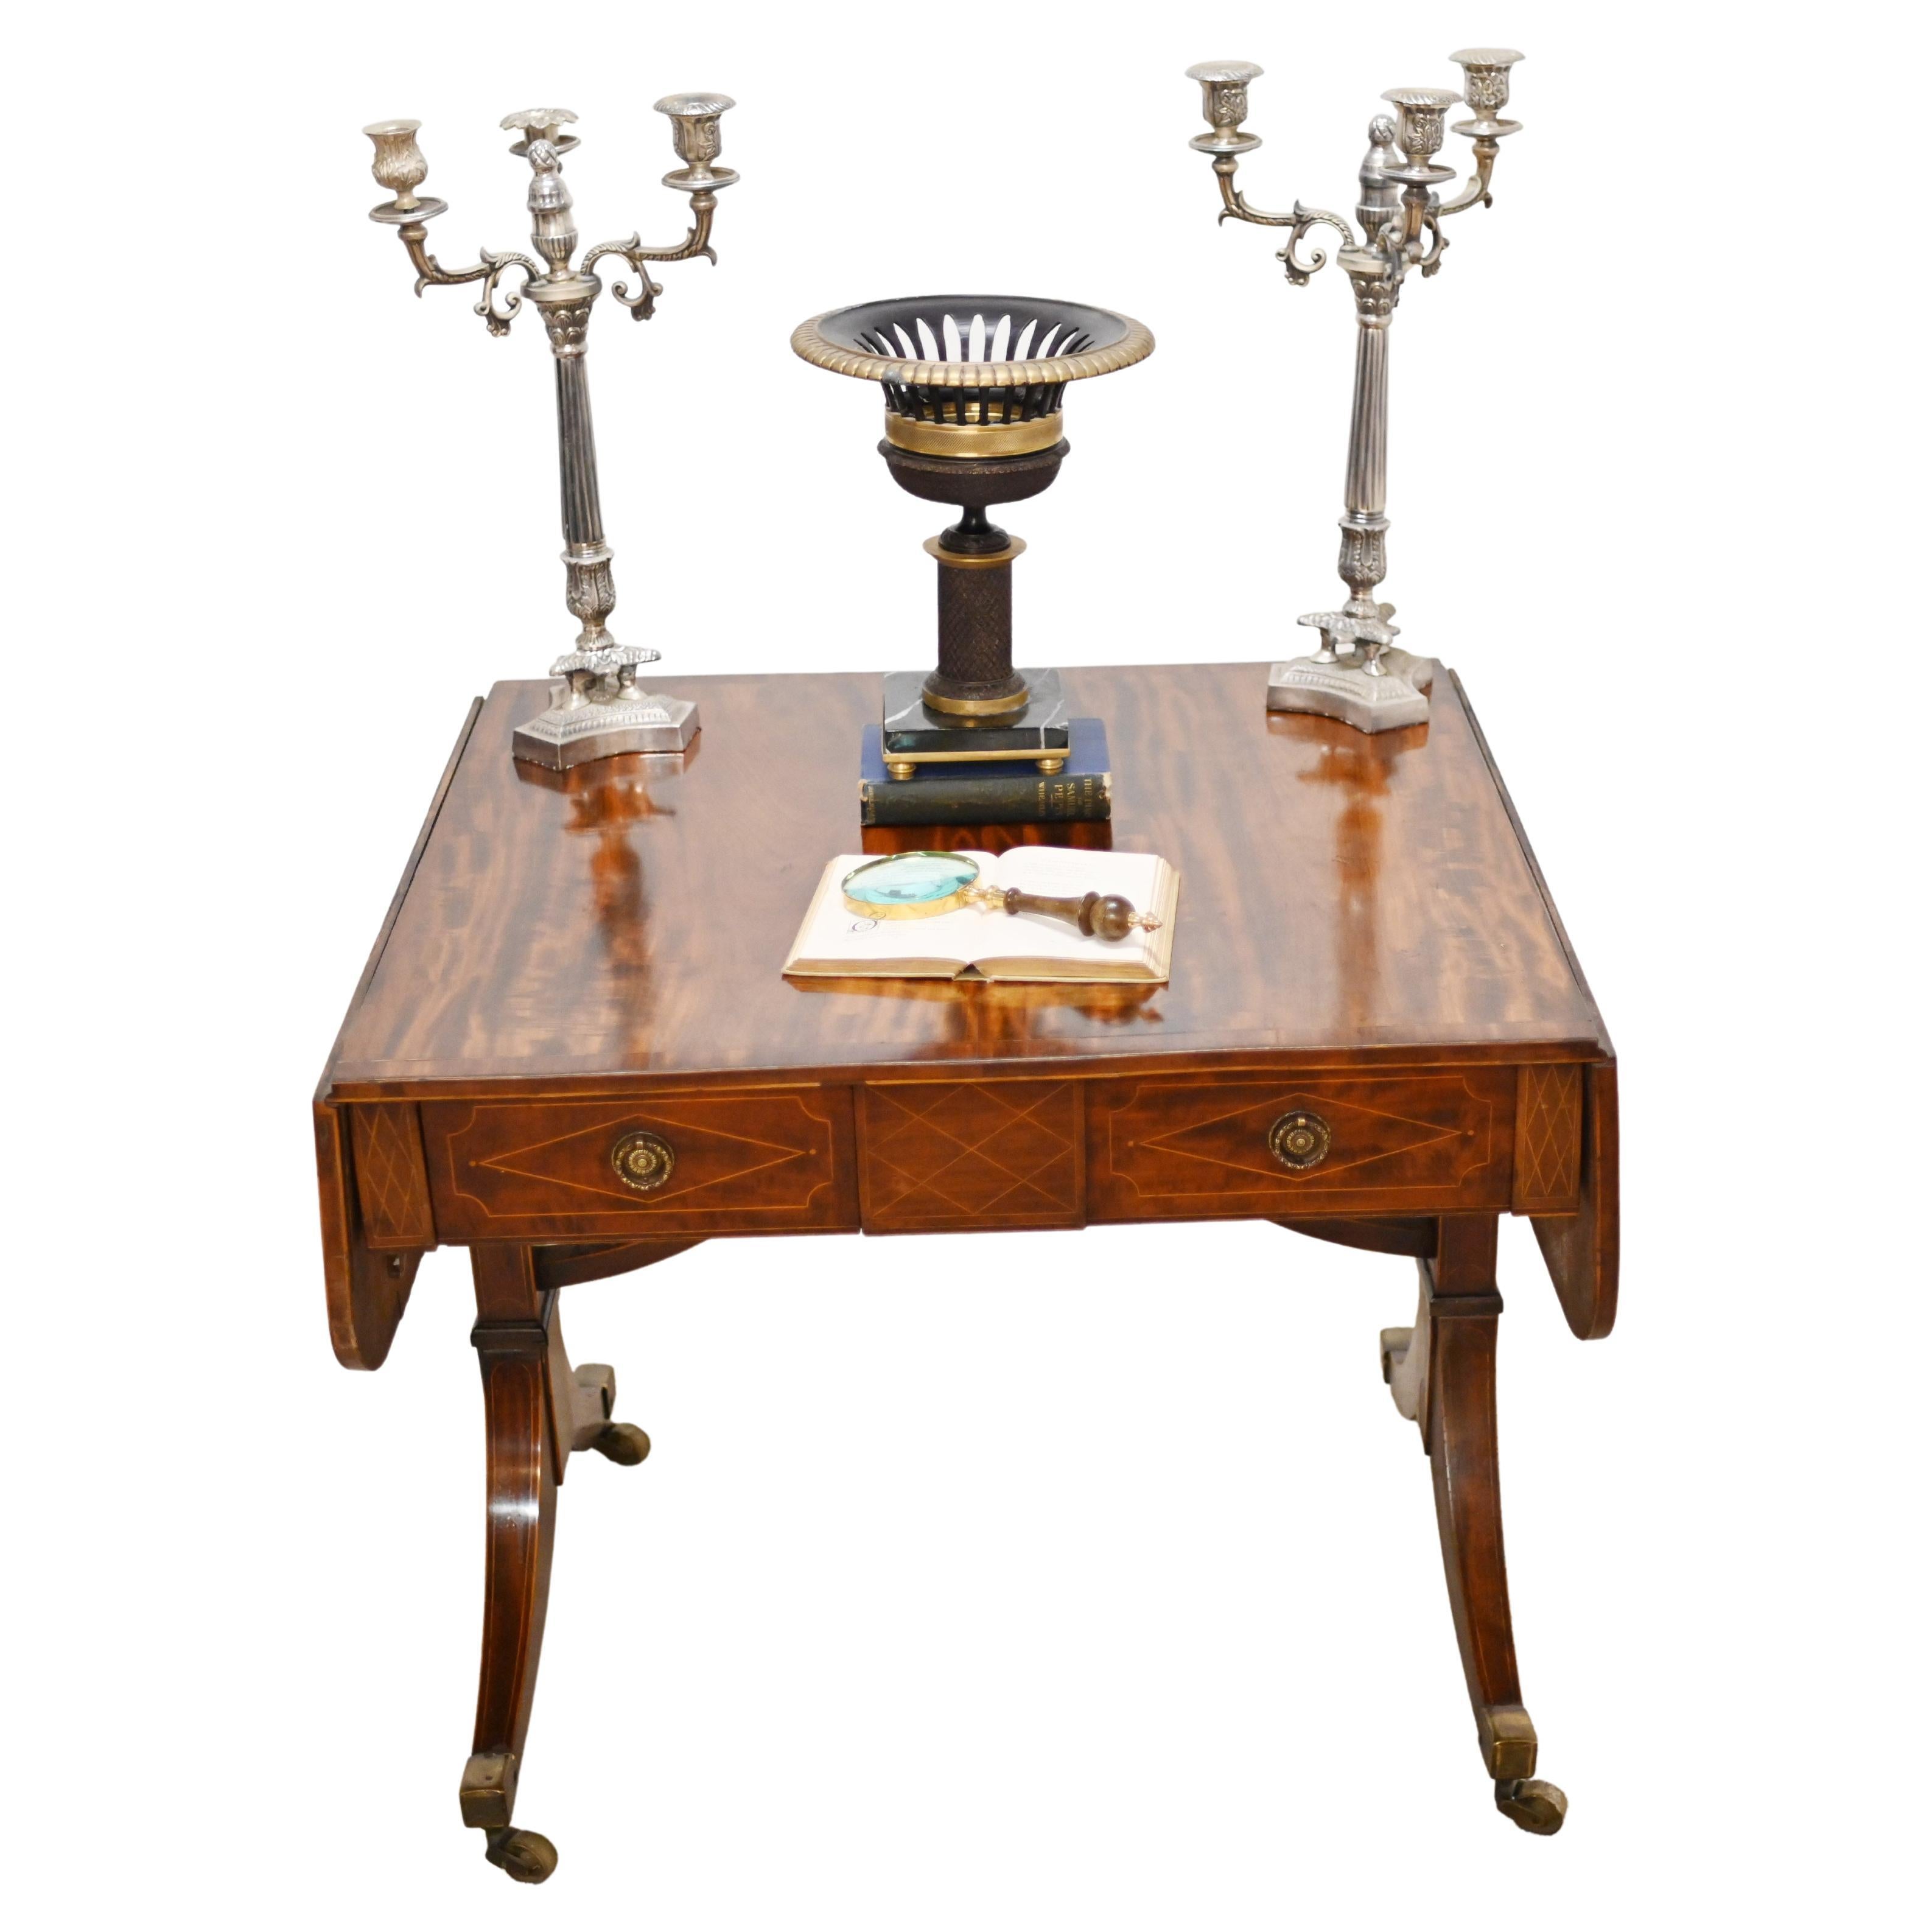 Regency Sofa Table Mahogany Antique Furniture For Sale